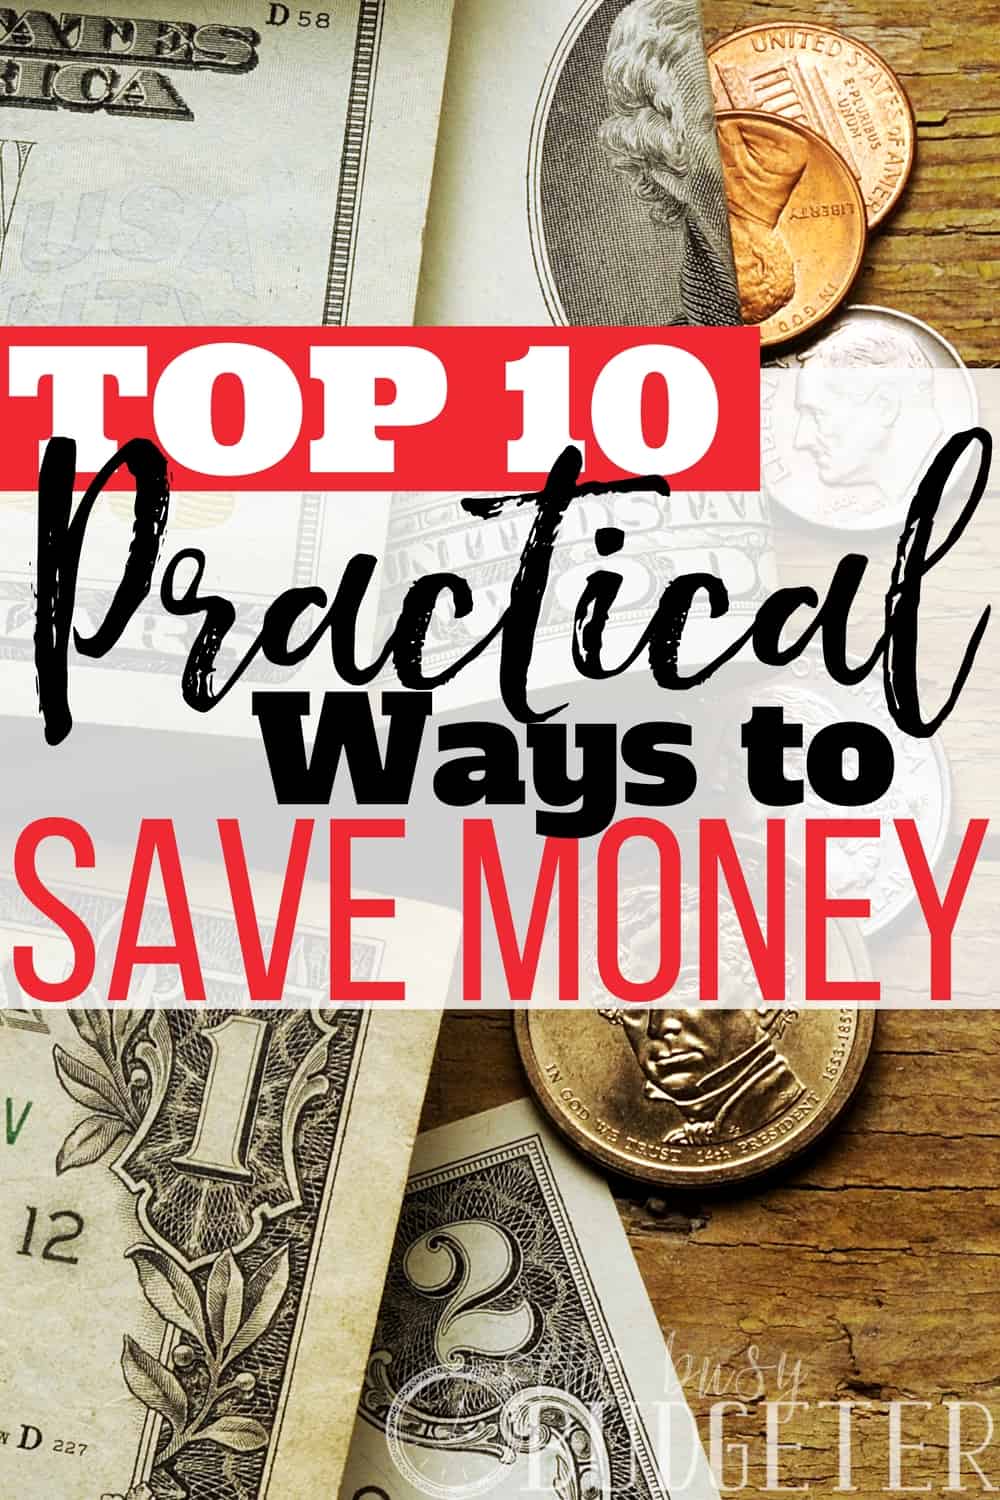 Practical is right!! Saving money and budgeting has always seemed so overwhelming but these tips make it totally doable. Fantastic article!